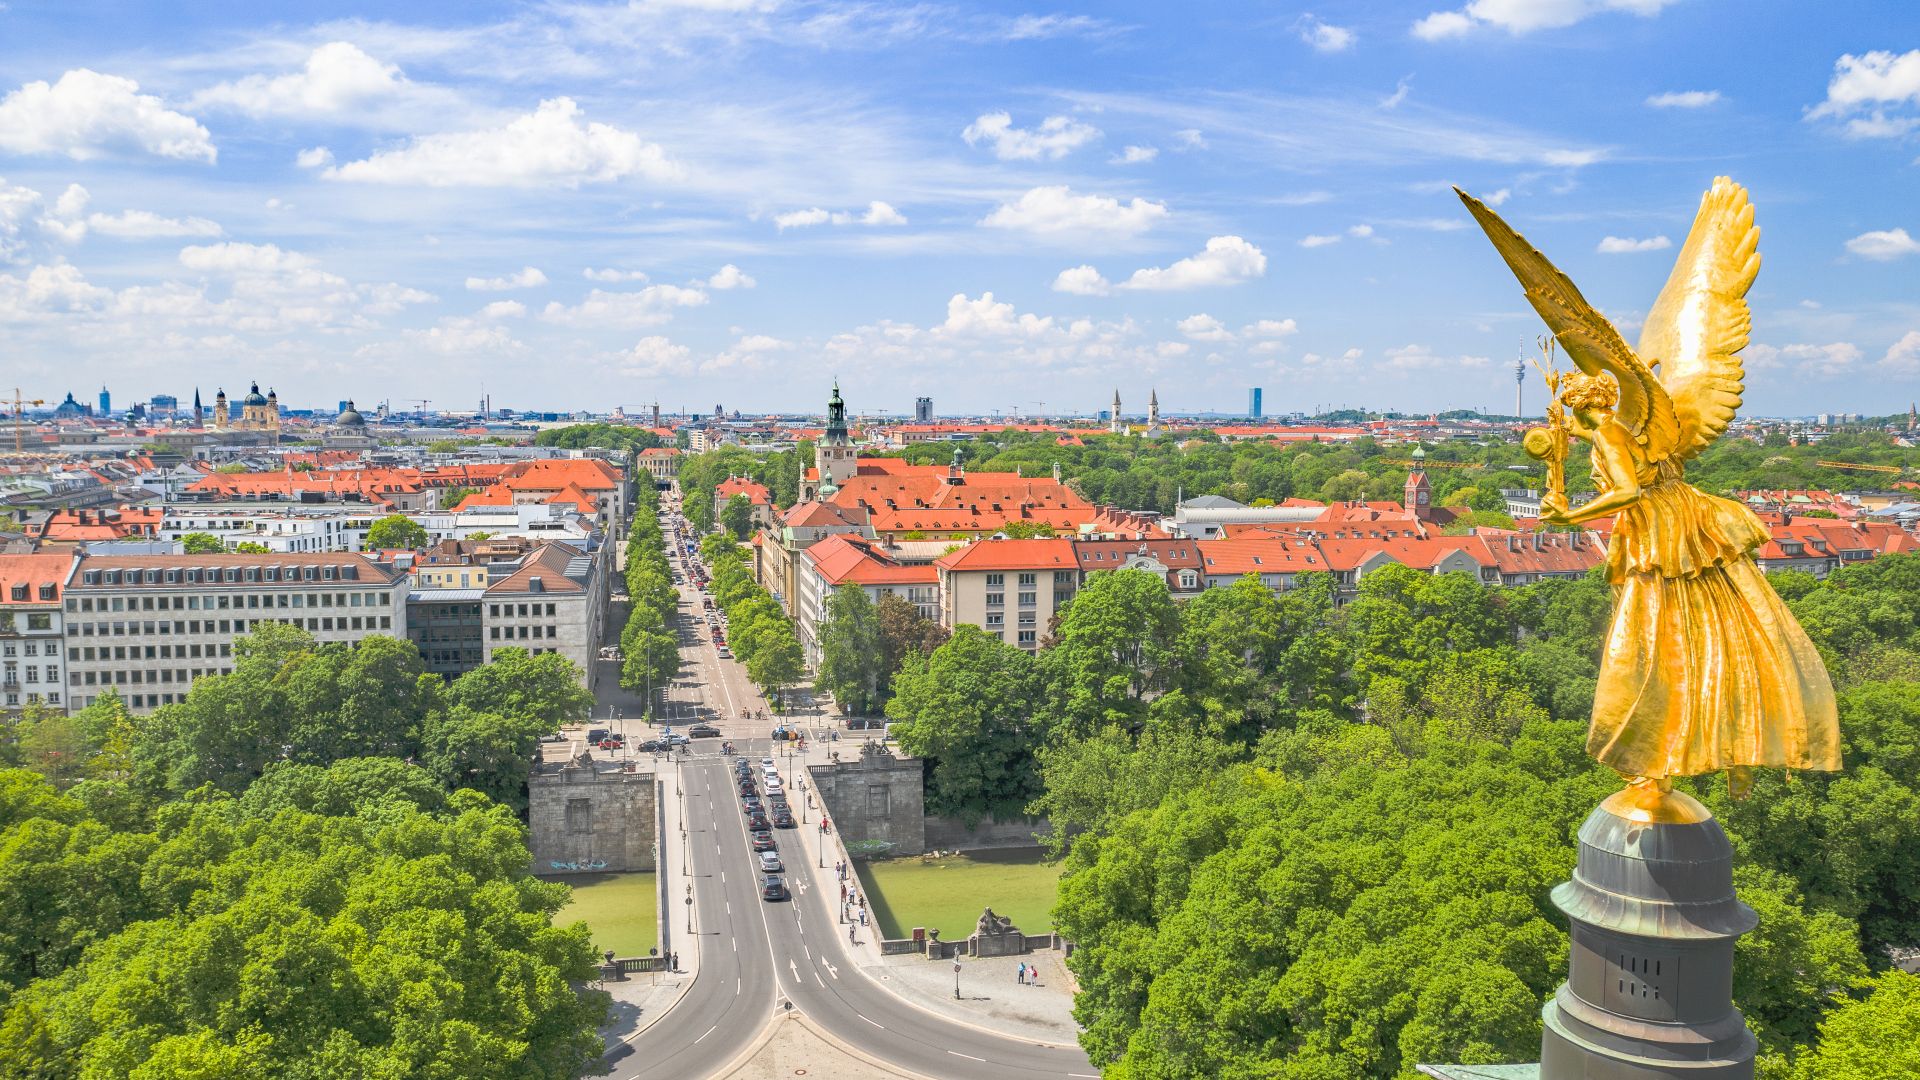 Munich: The Angel of Peace with Prinzregentenstrasse and the Green City